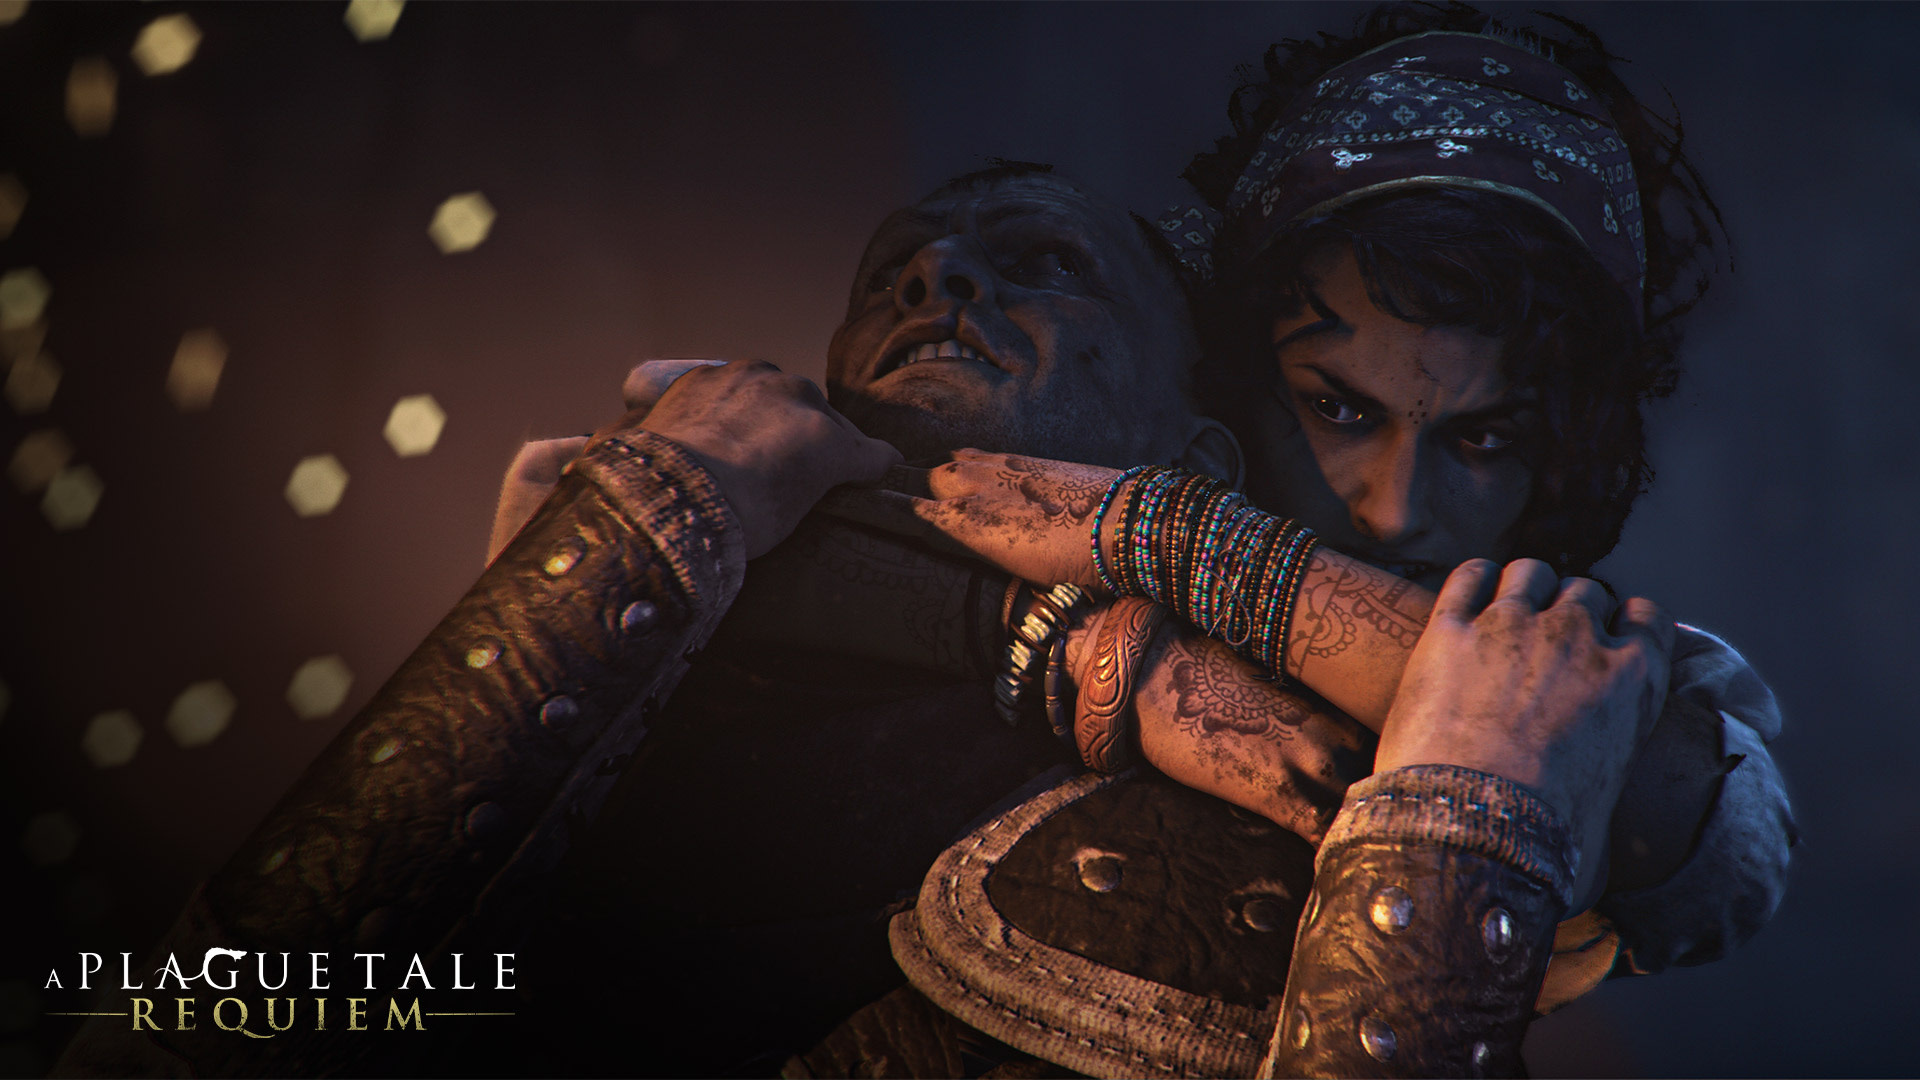 A Plague Tale: Requiem: The rats, which are light-averse, play a huge role in the game. 1920x1080 Full HD Wallpaper.